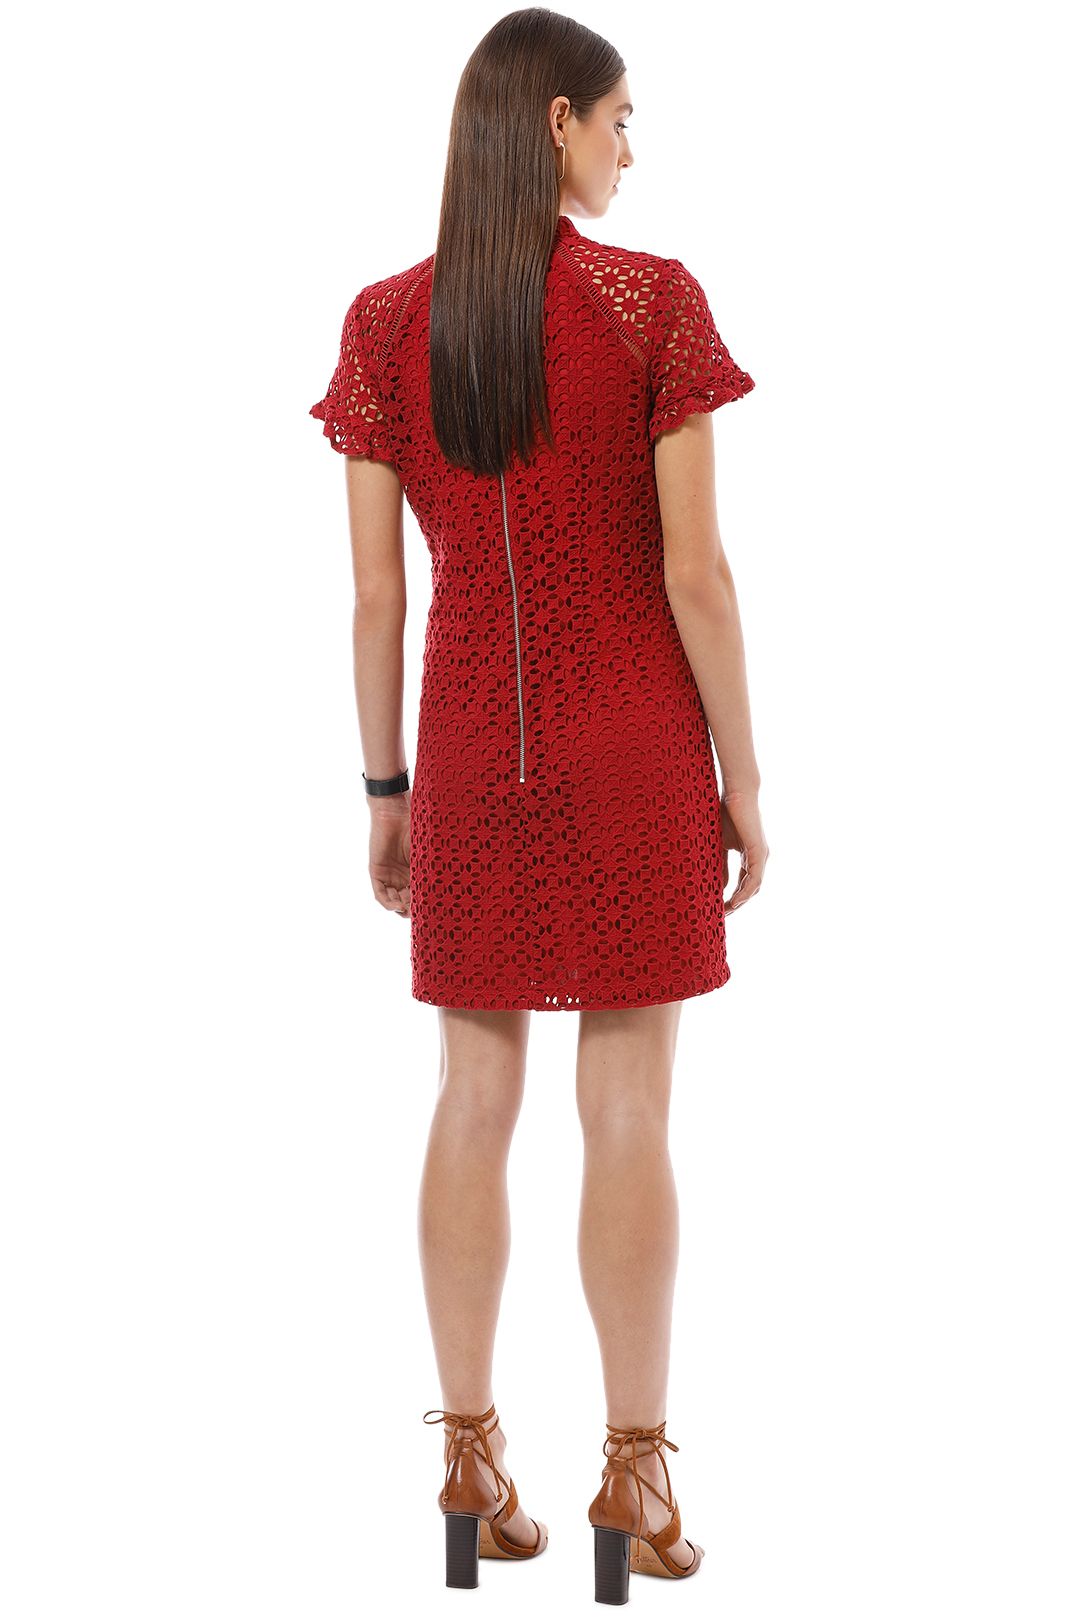 Cue - Lace Shift Dress - Red - Back